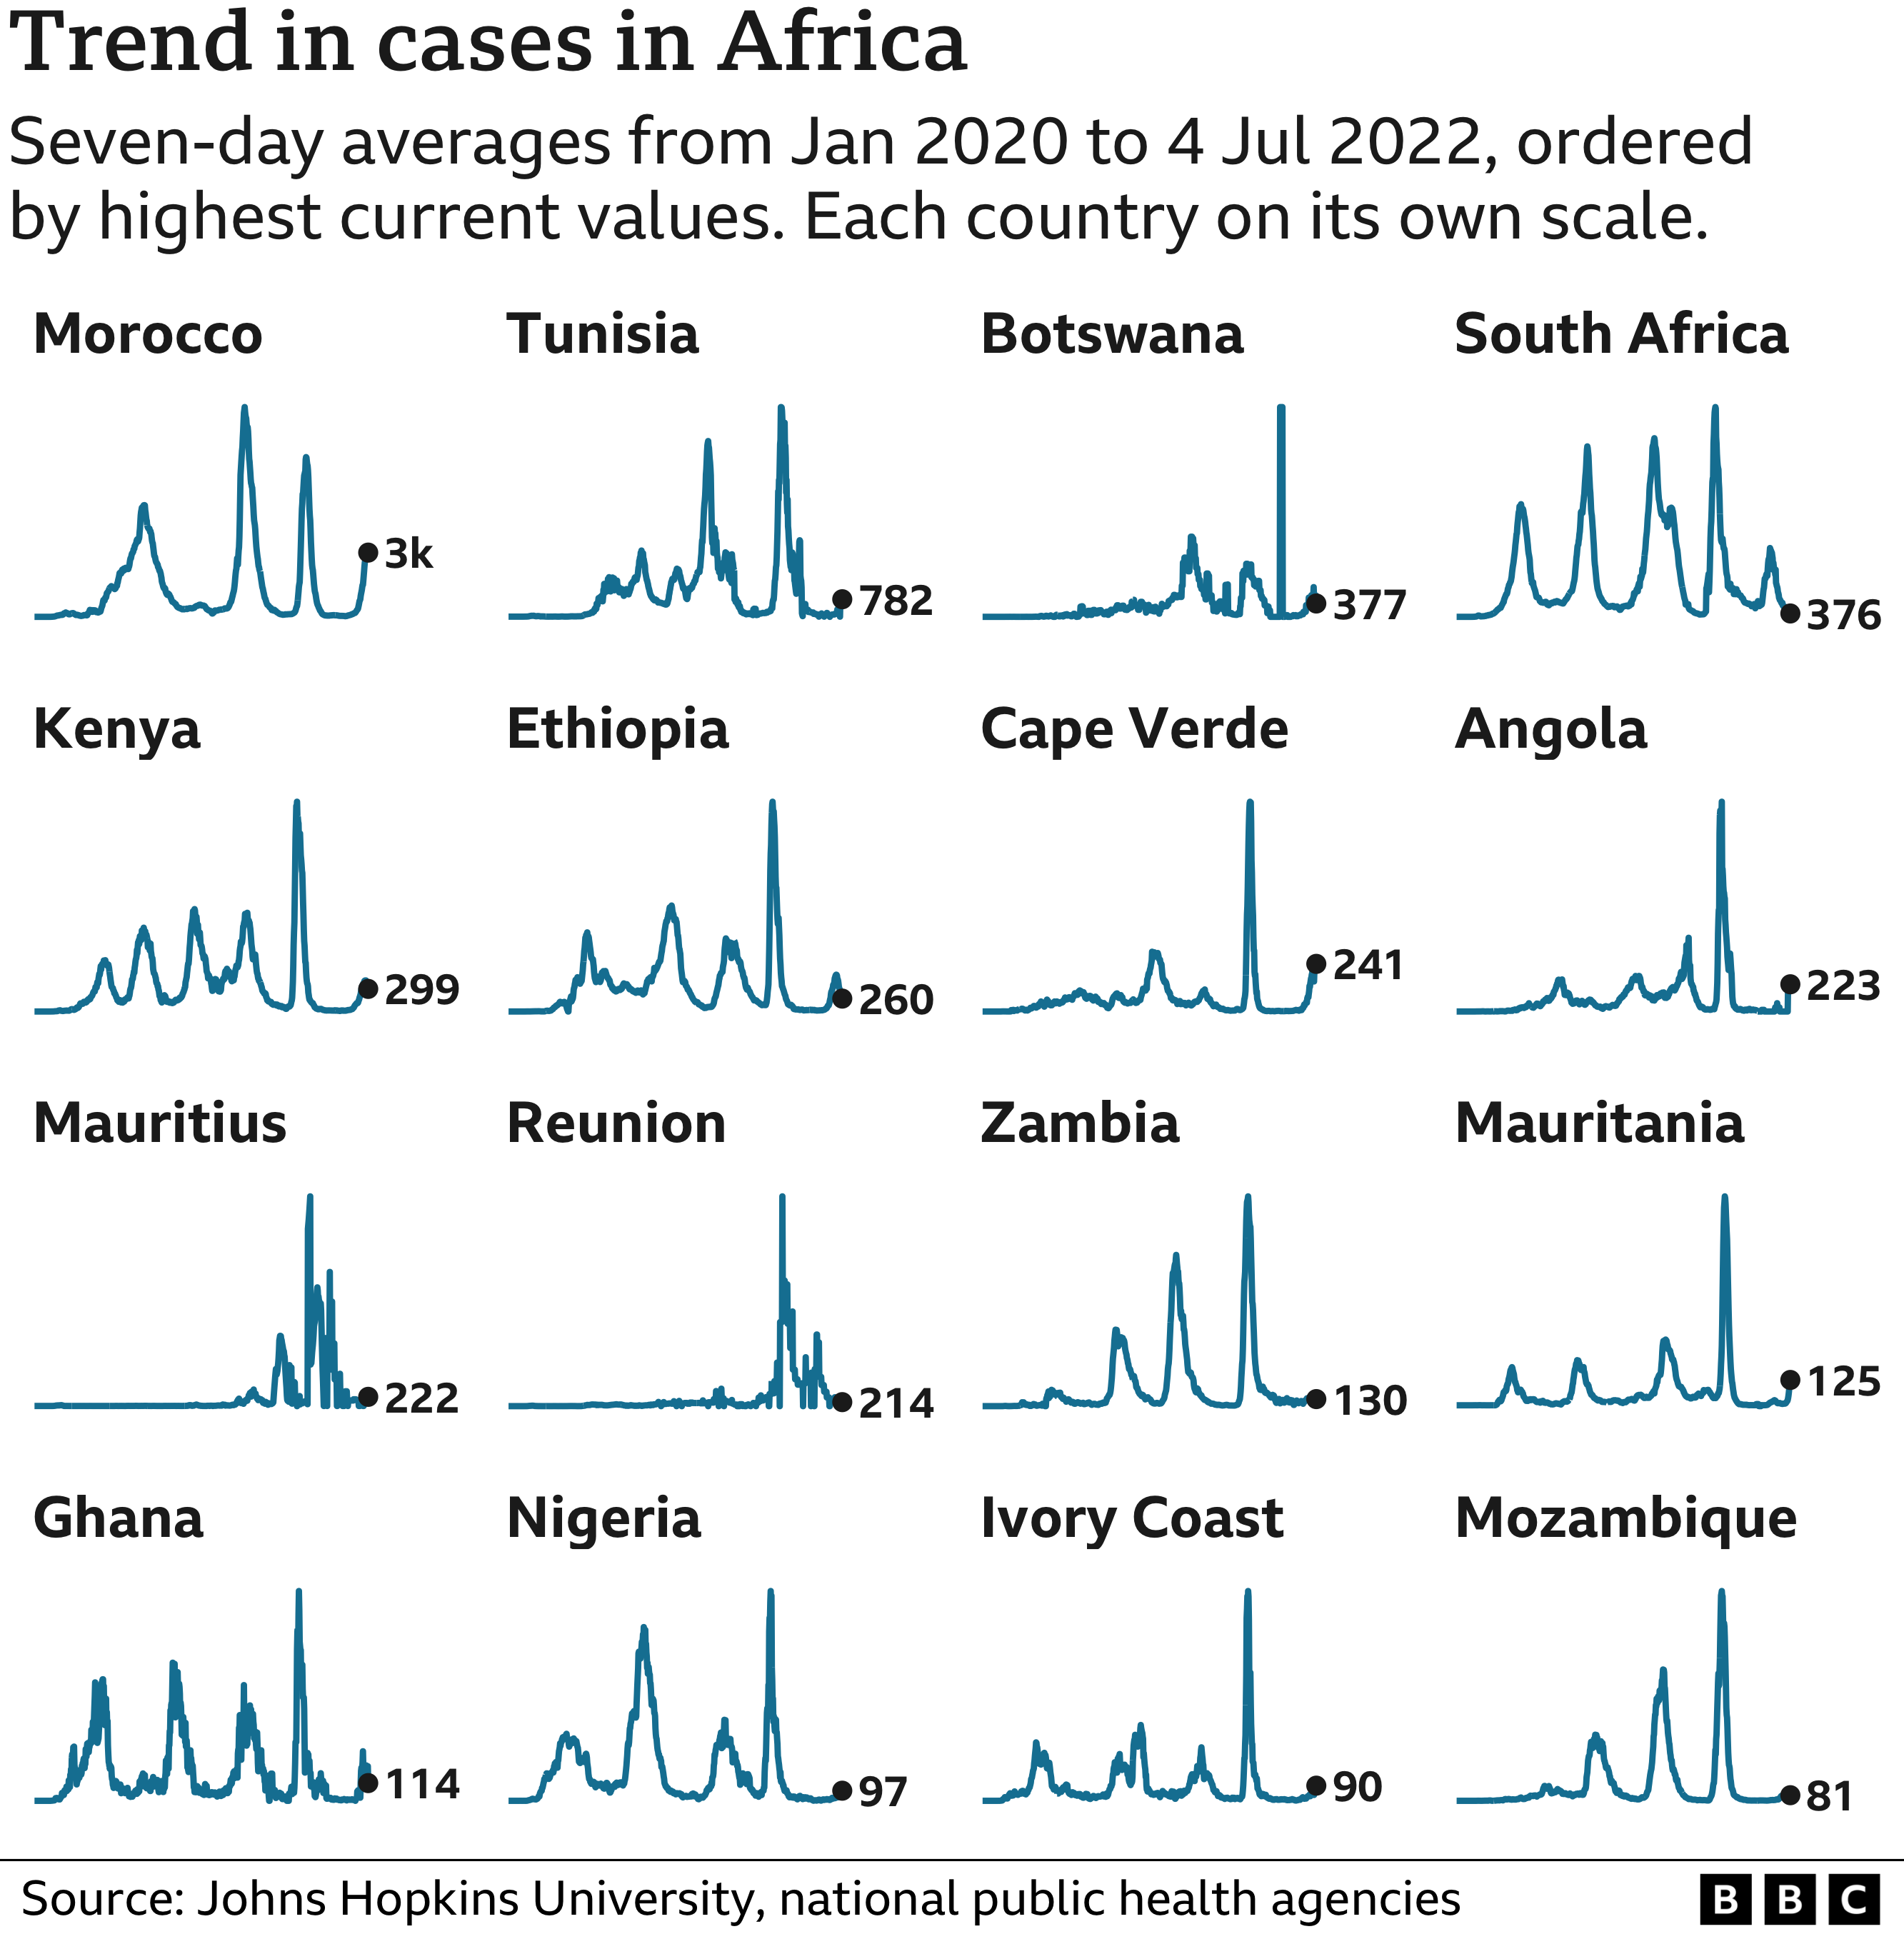 Trend in cases chart for countries in Africa